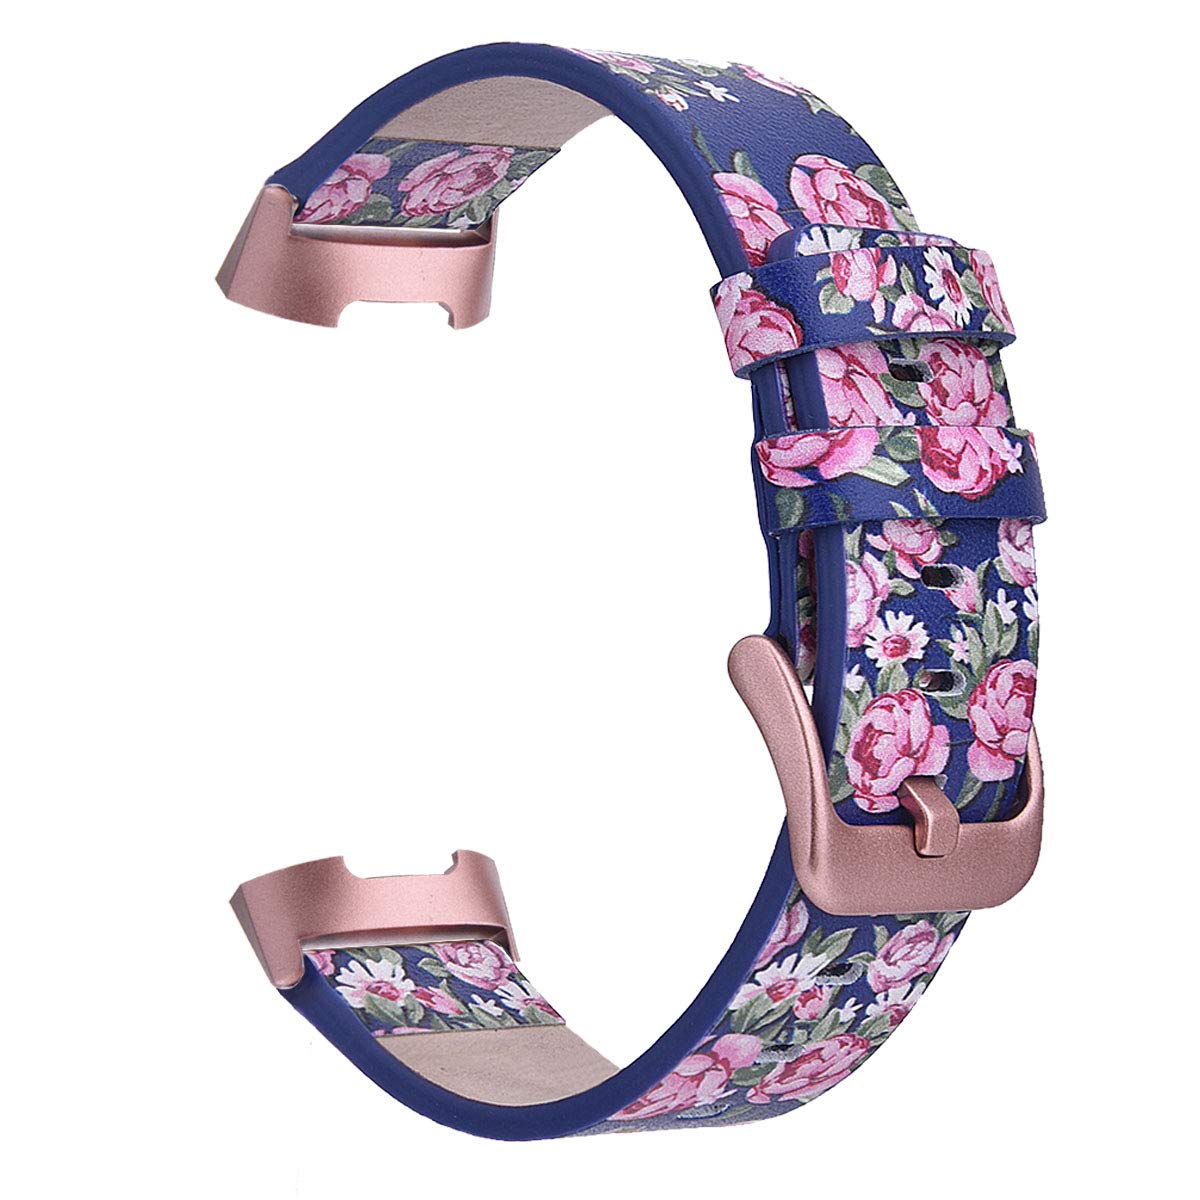 TOROTOP Genuine Leather Floral Band